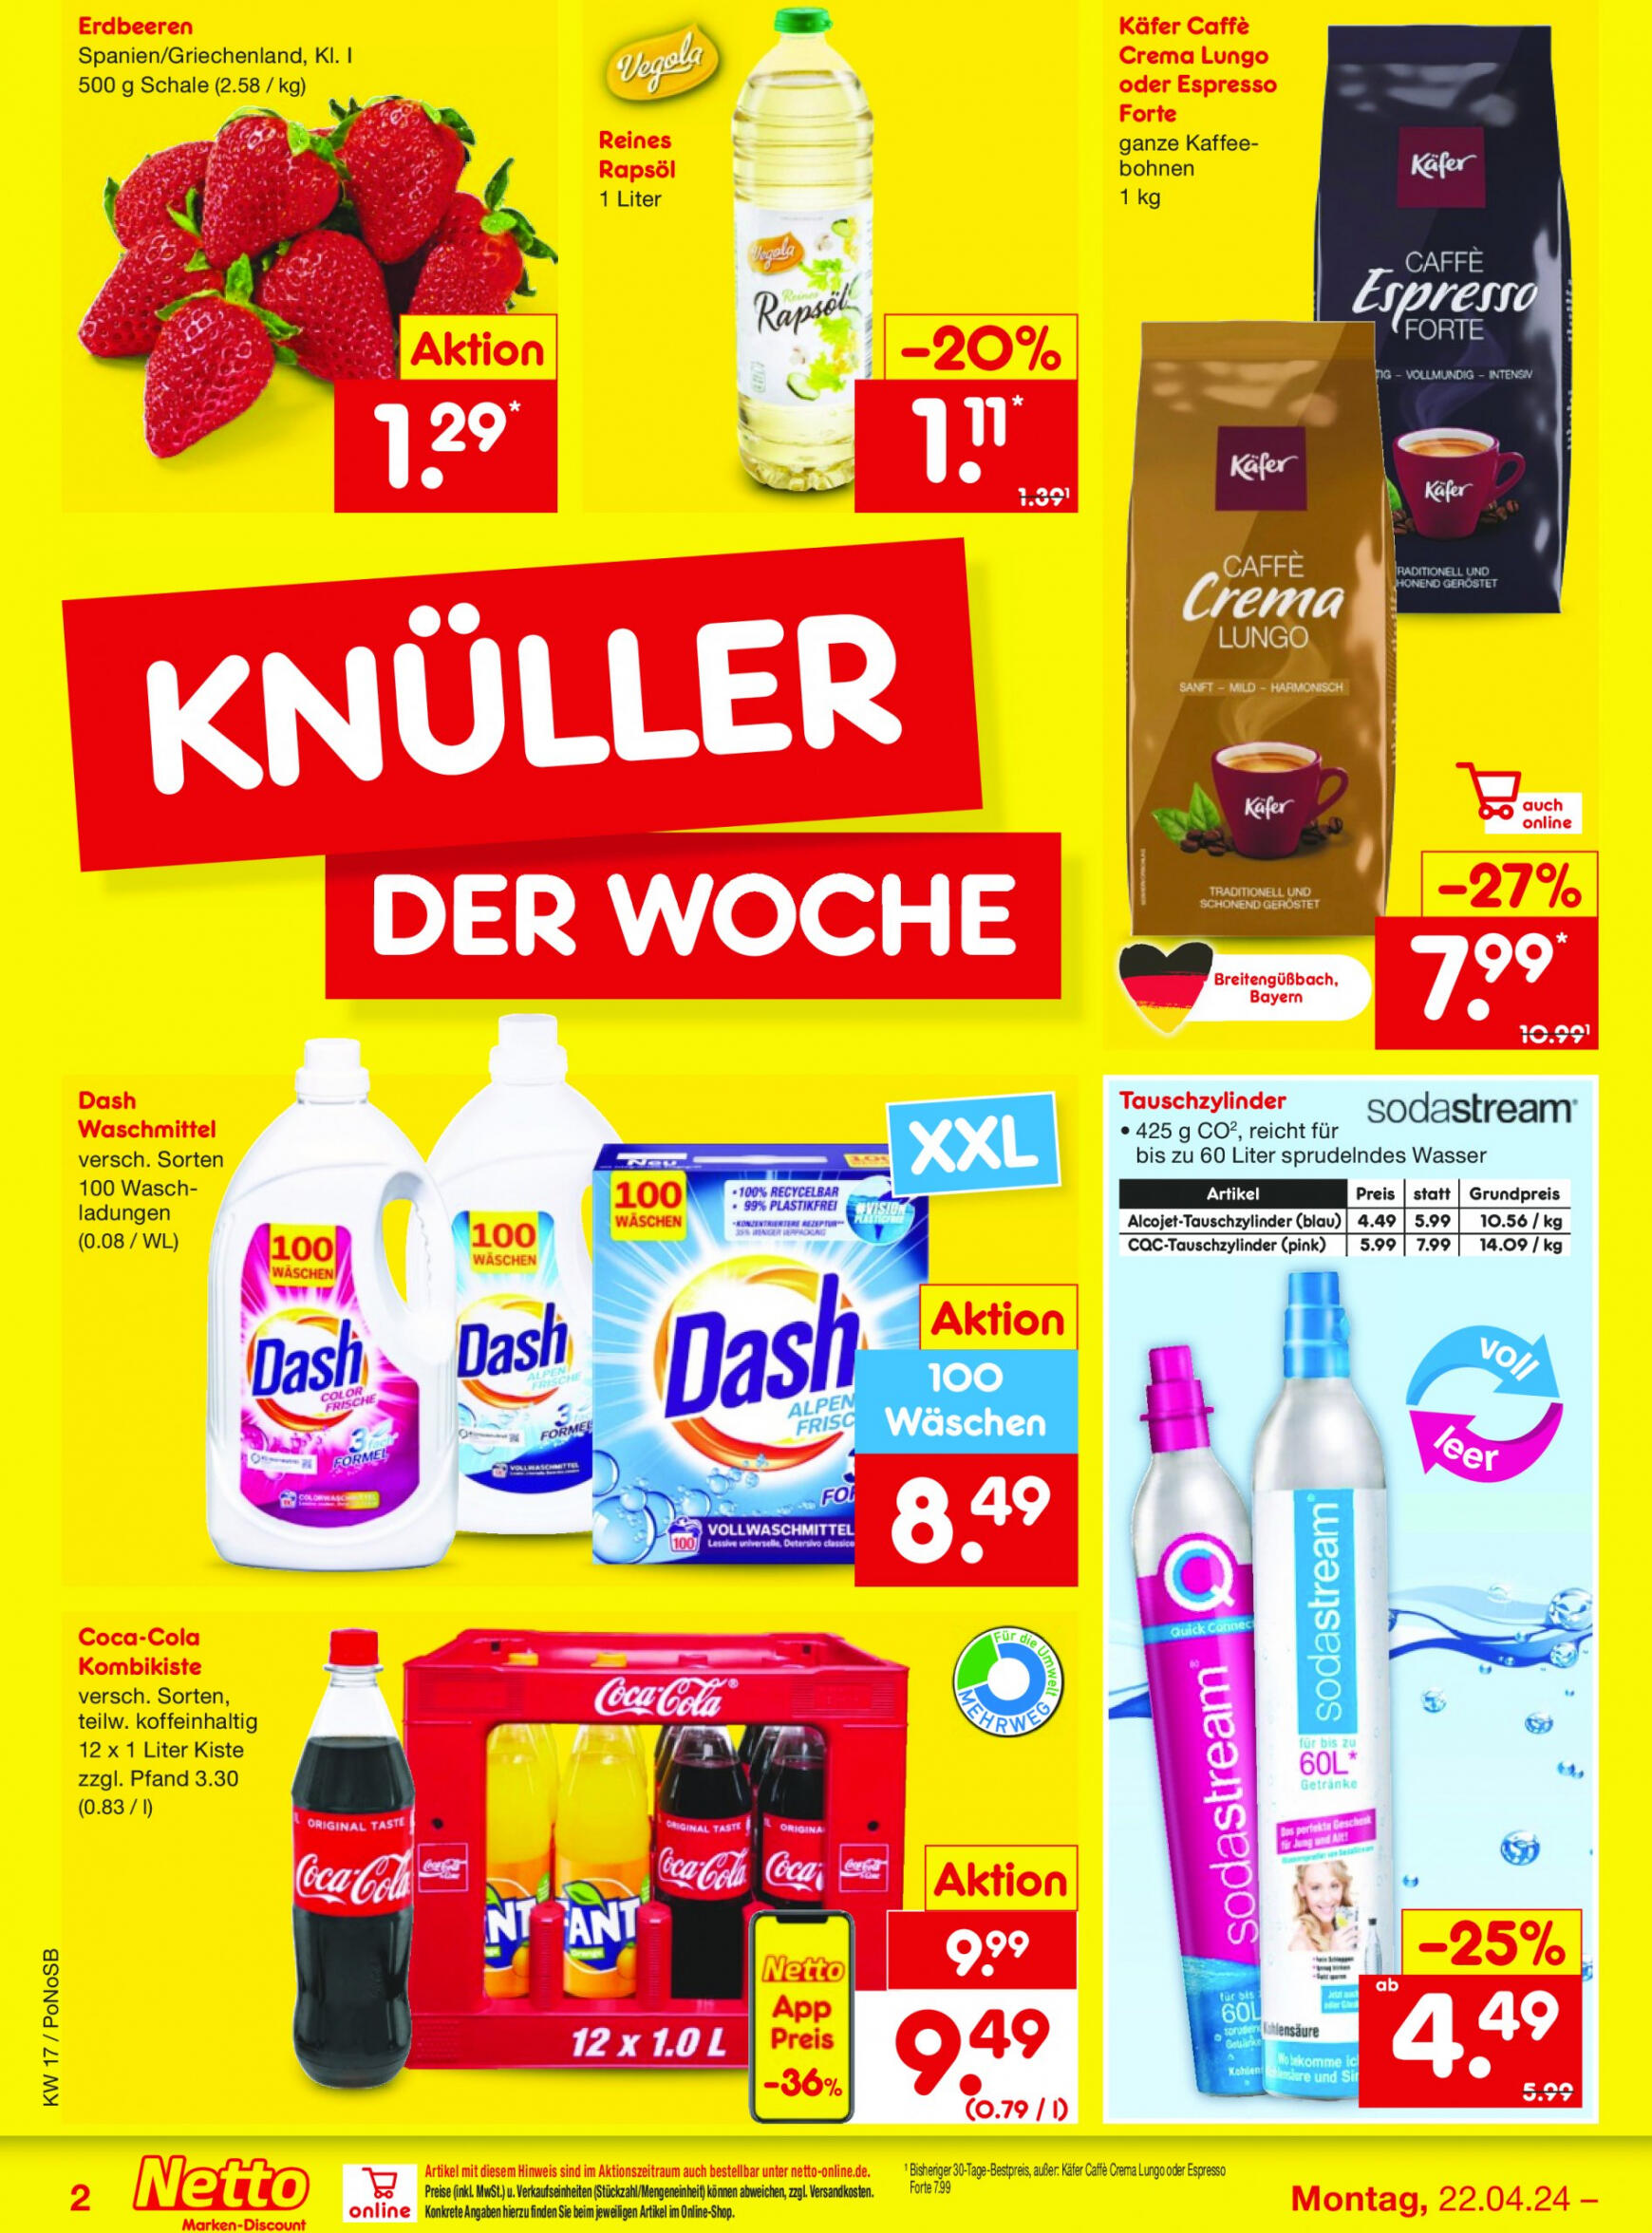 netto - Flyer Netto aktuell 22.04. - 27.04. - page: 2